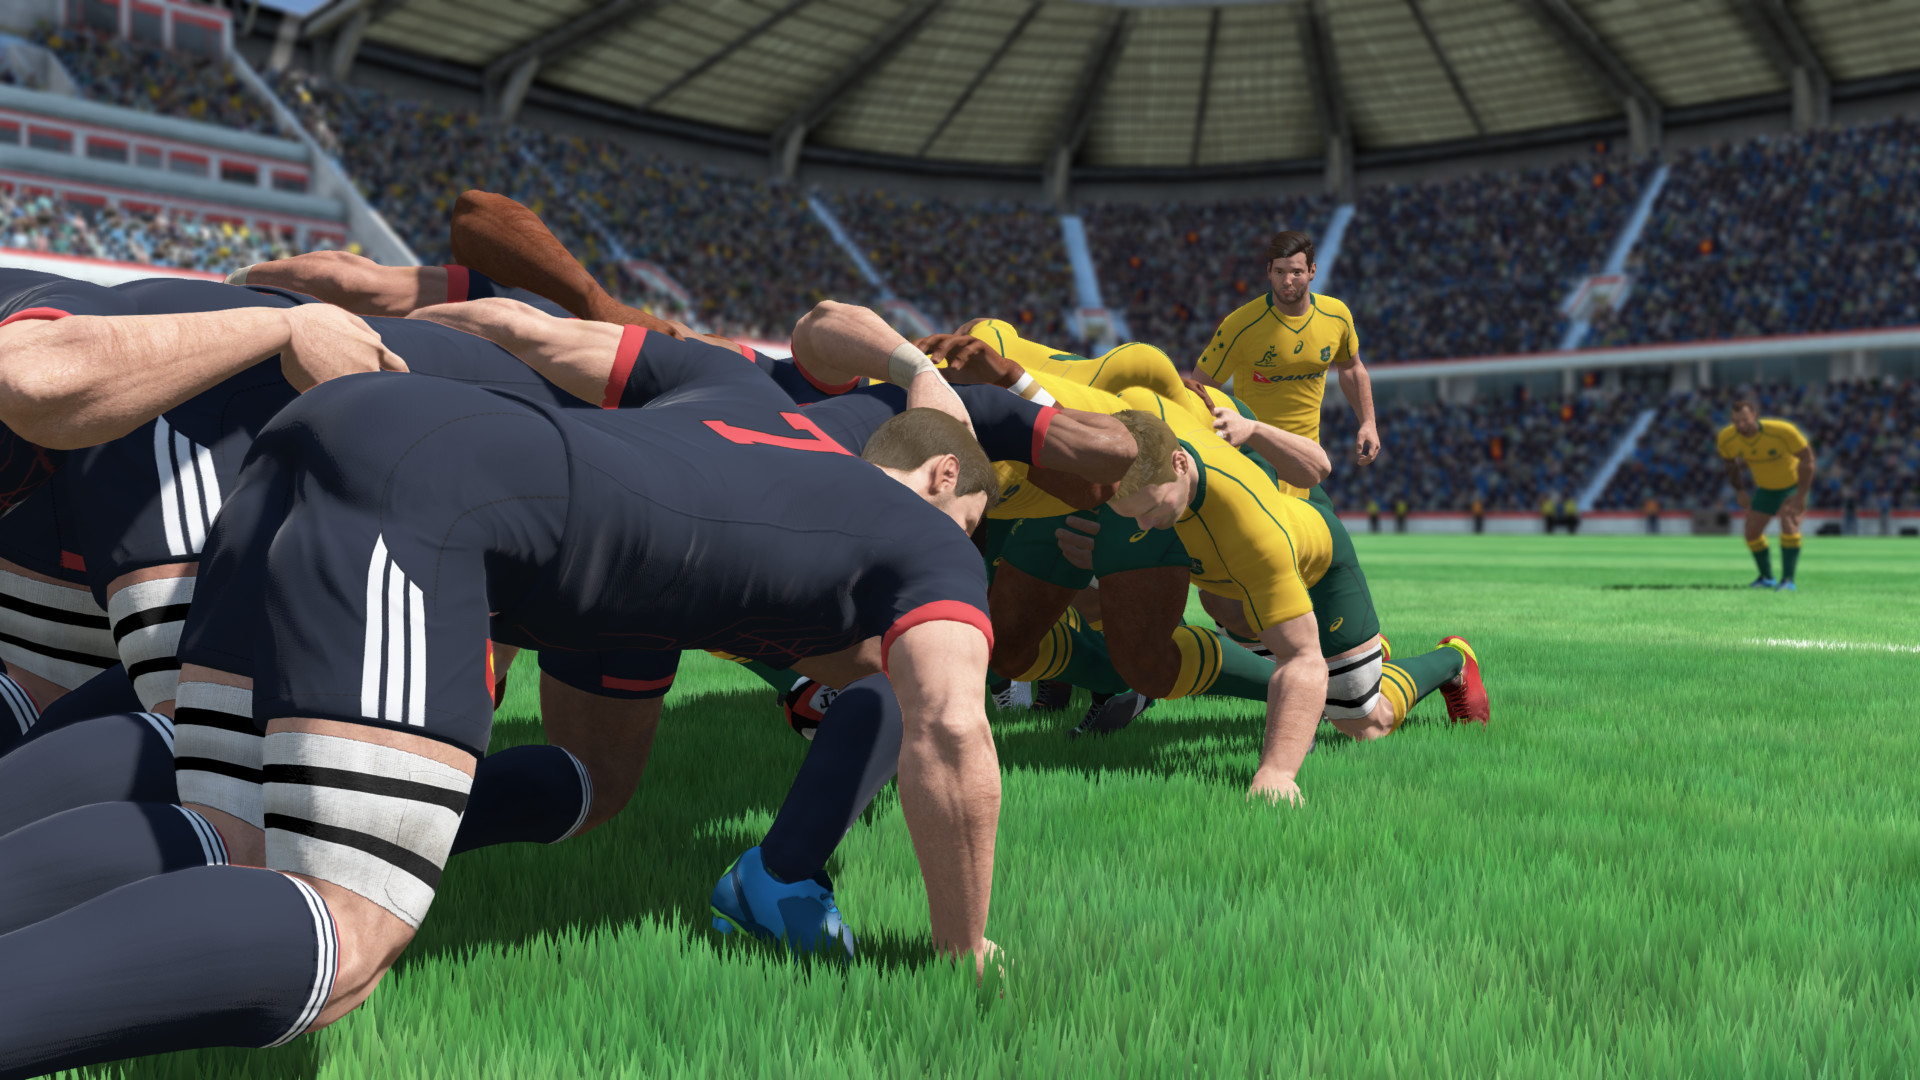 Rugby 18 Ps4 Wallpaper - Rugby 18 Ps4 Game - HD Wallpaper 